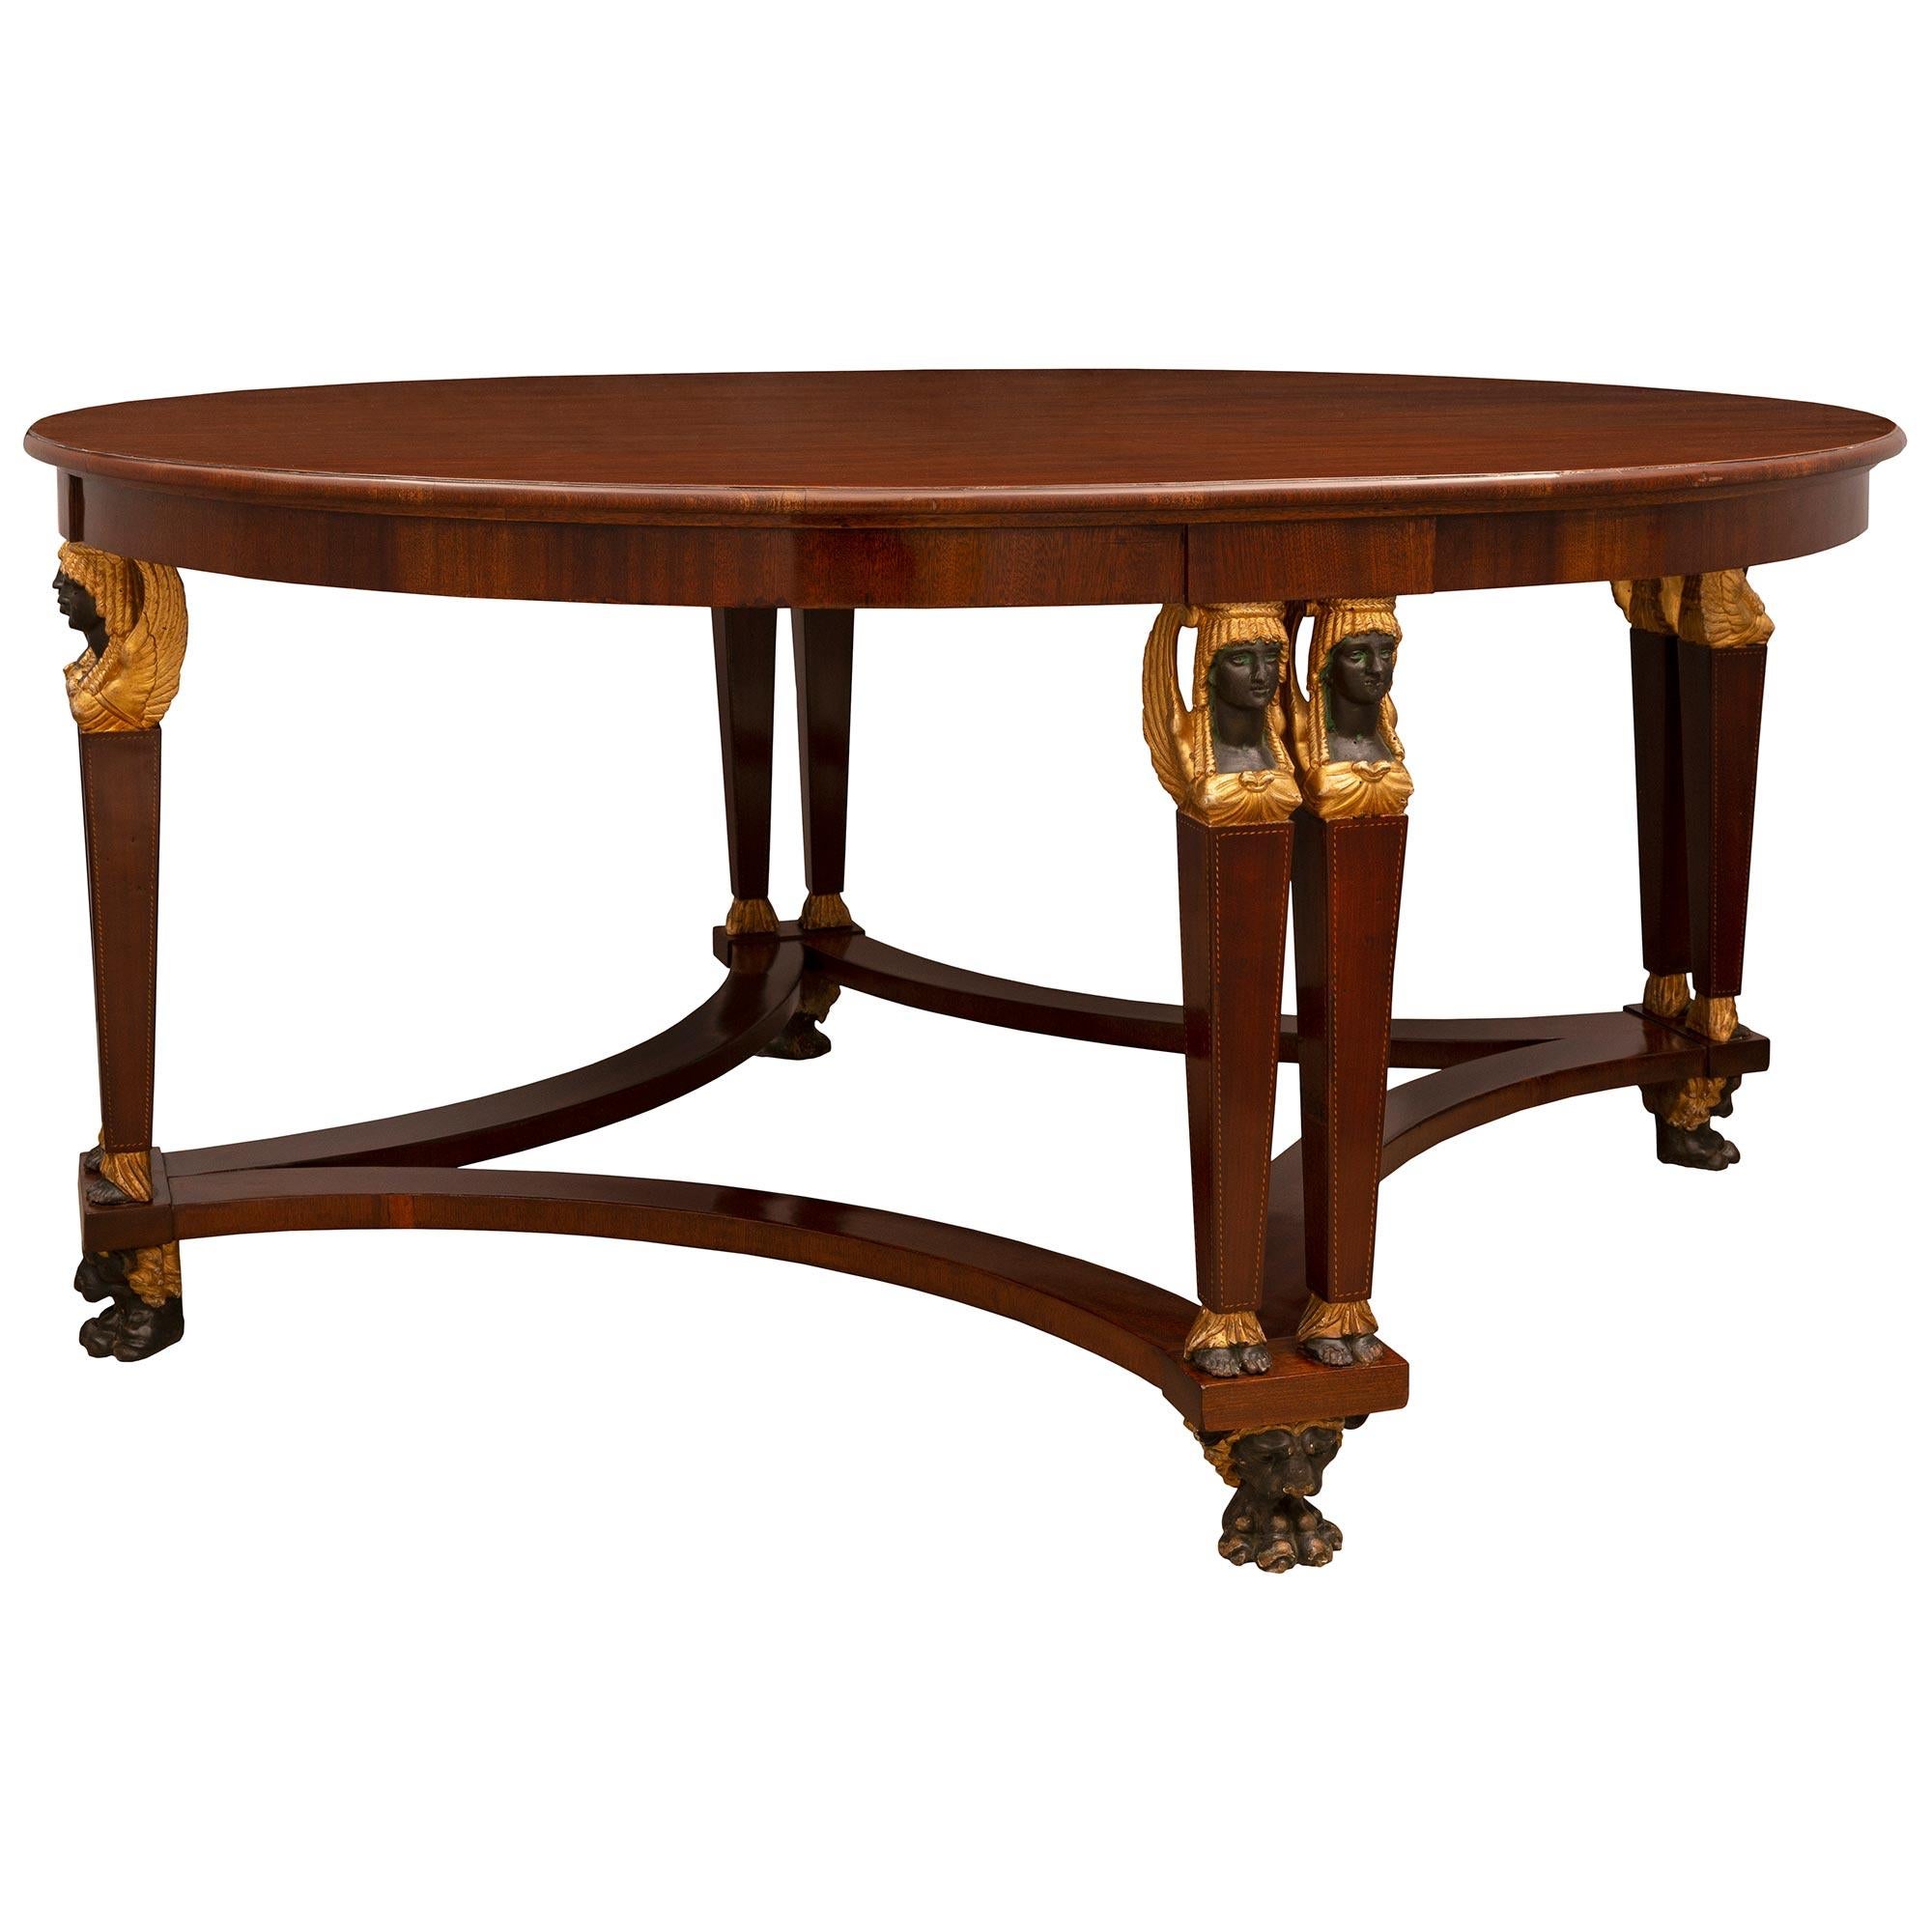 Neoclassical Italian 19th Century Empire St. Oval Mahogany, Gilt and Patinated Center Table For Sale